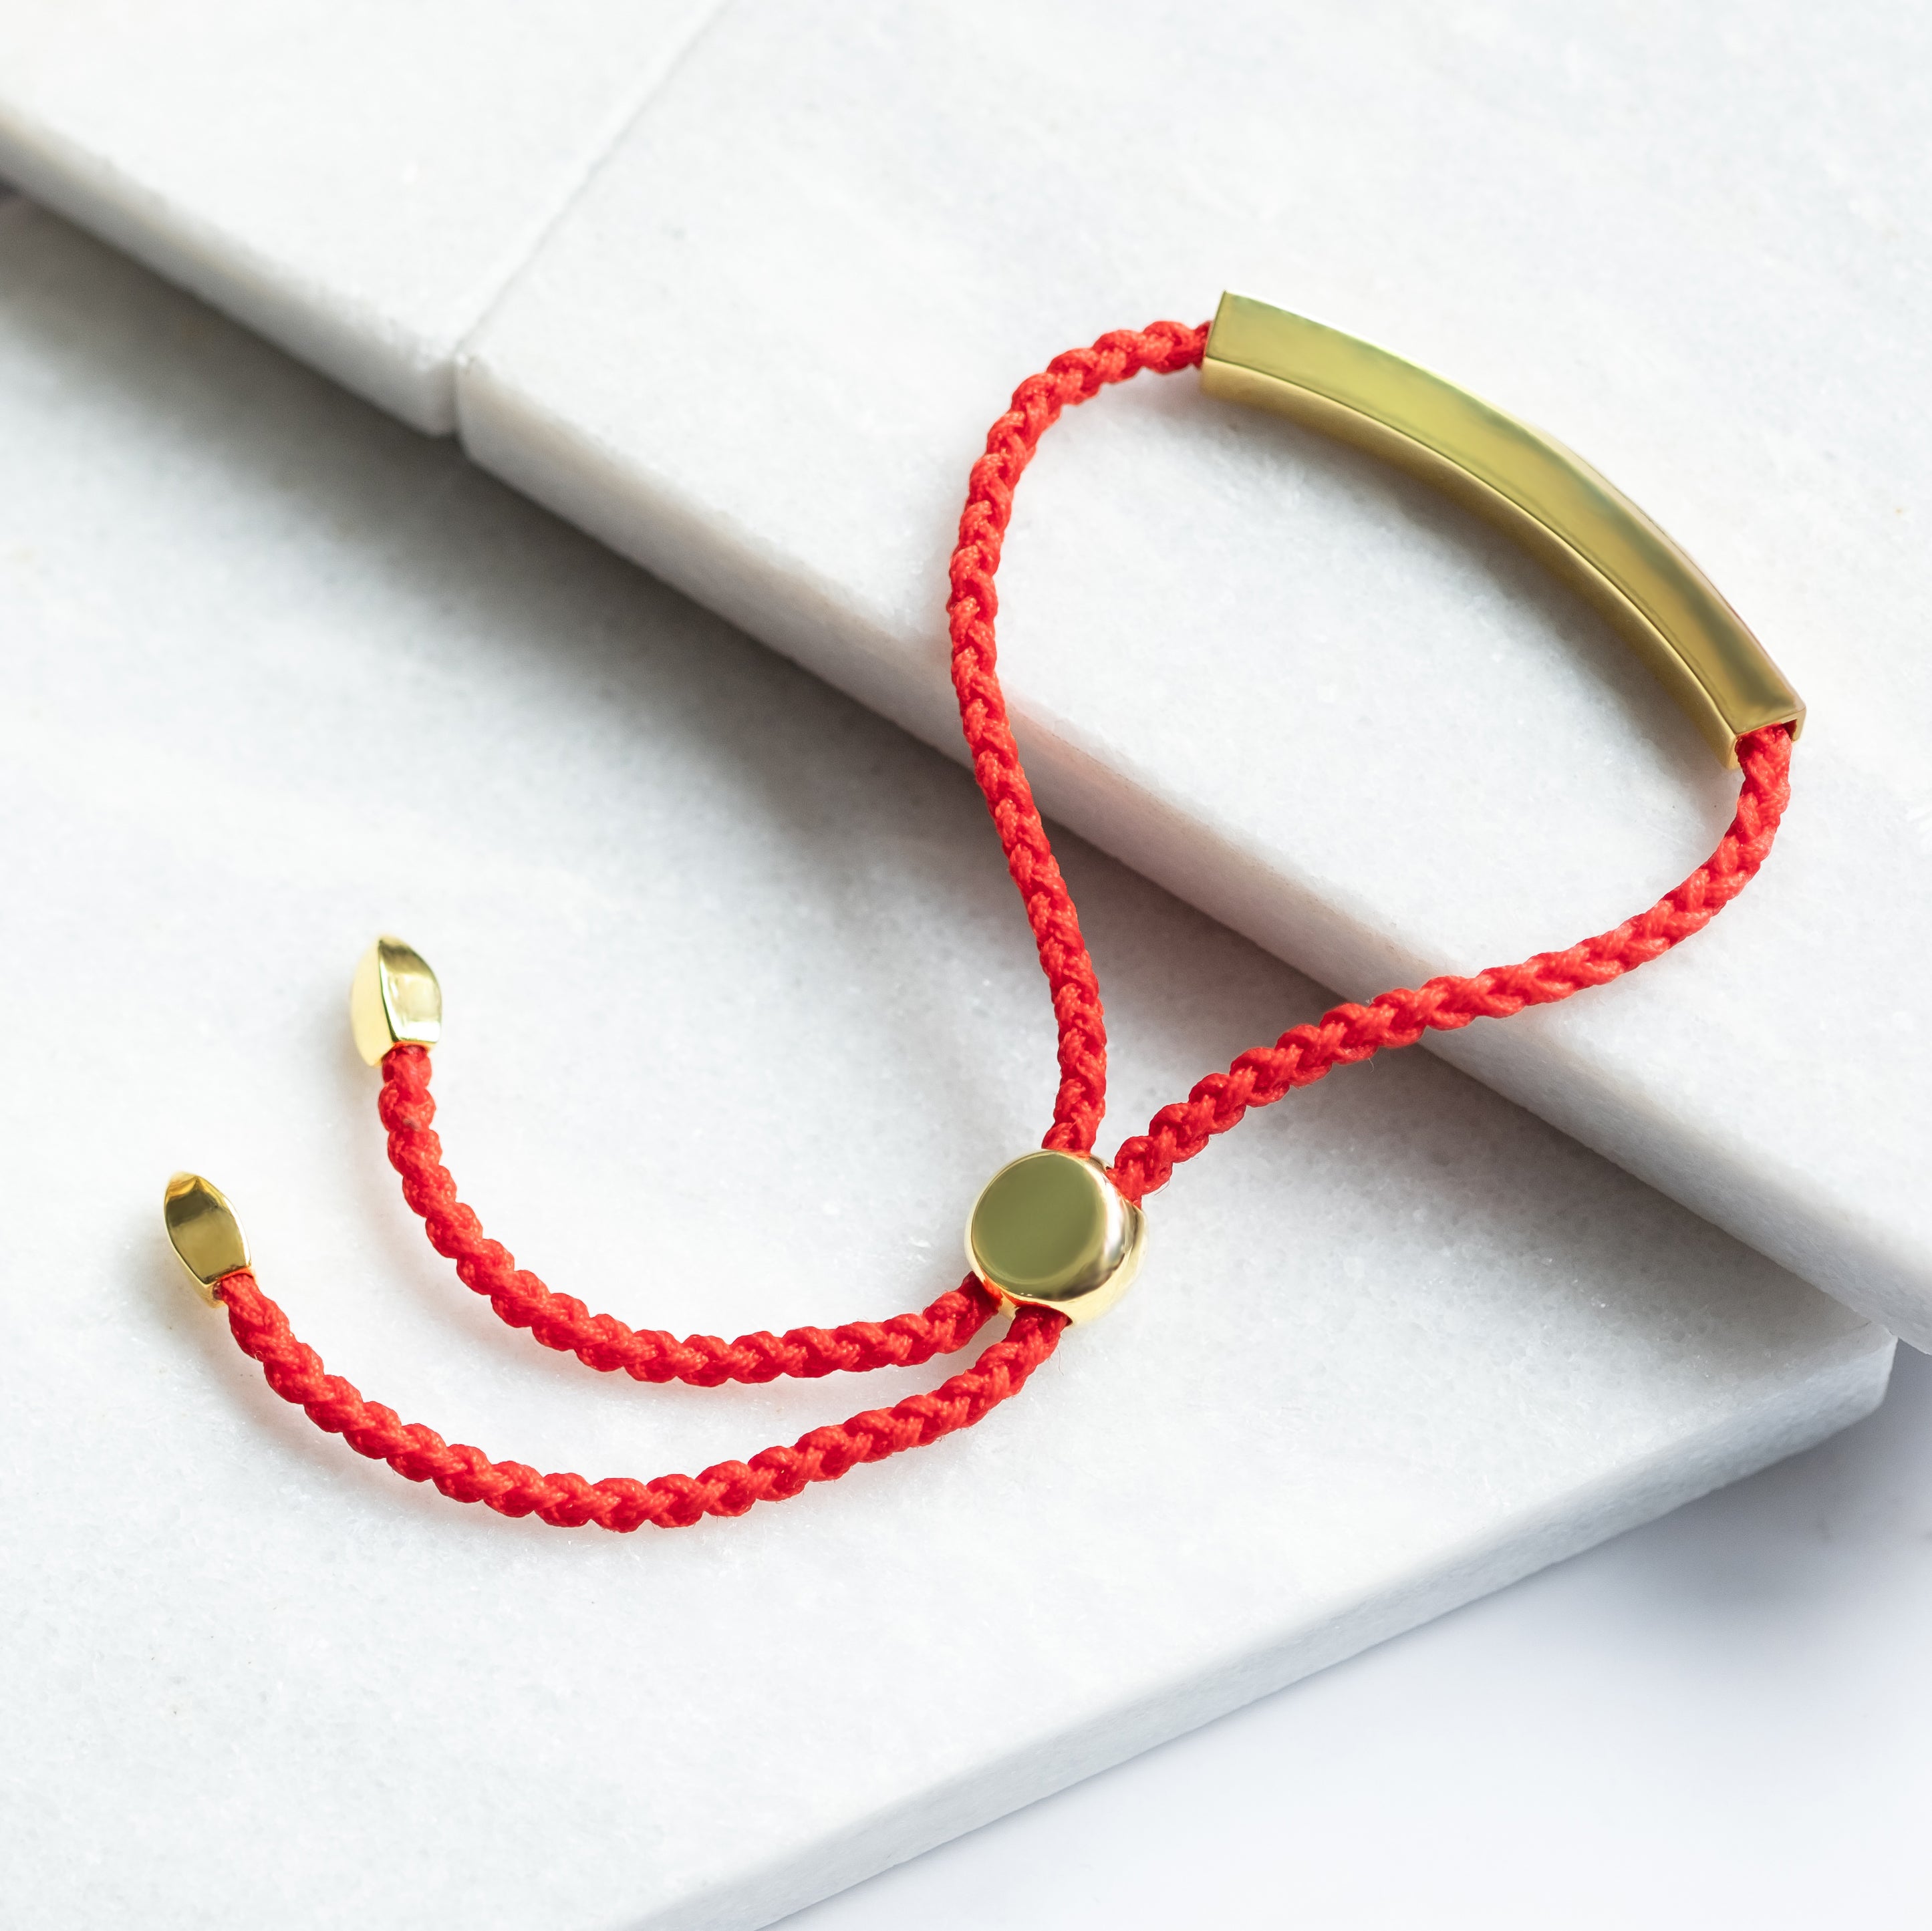 Sula bracelet in gold plating with red cord